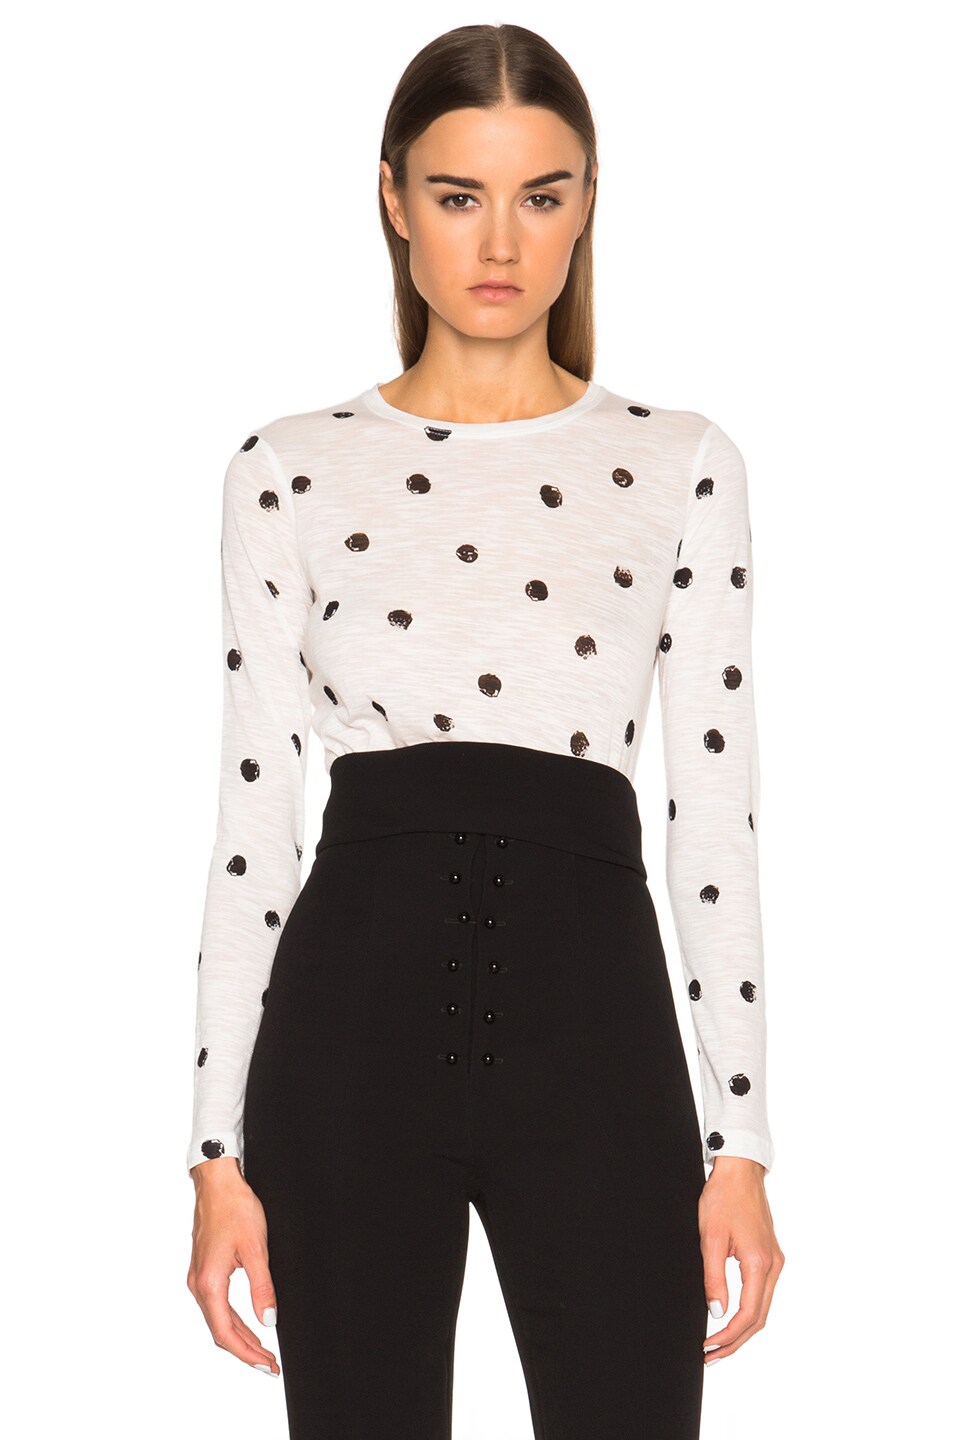 Image 1 of Proenza Schouler Printed Tissue Jersey Long Sleeve Tee in White & Black Dot Print